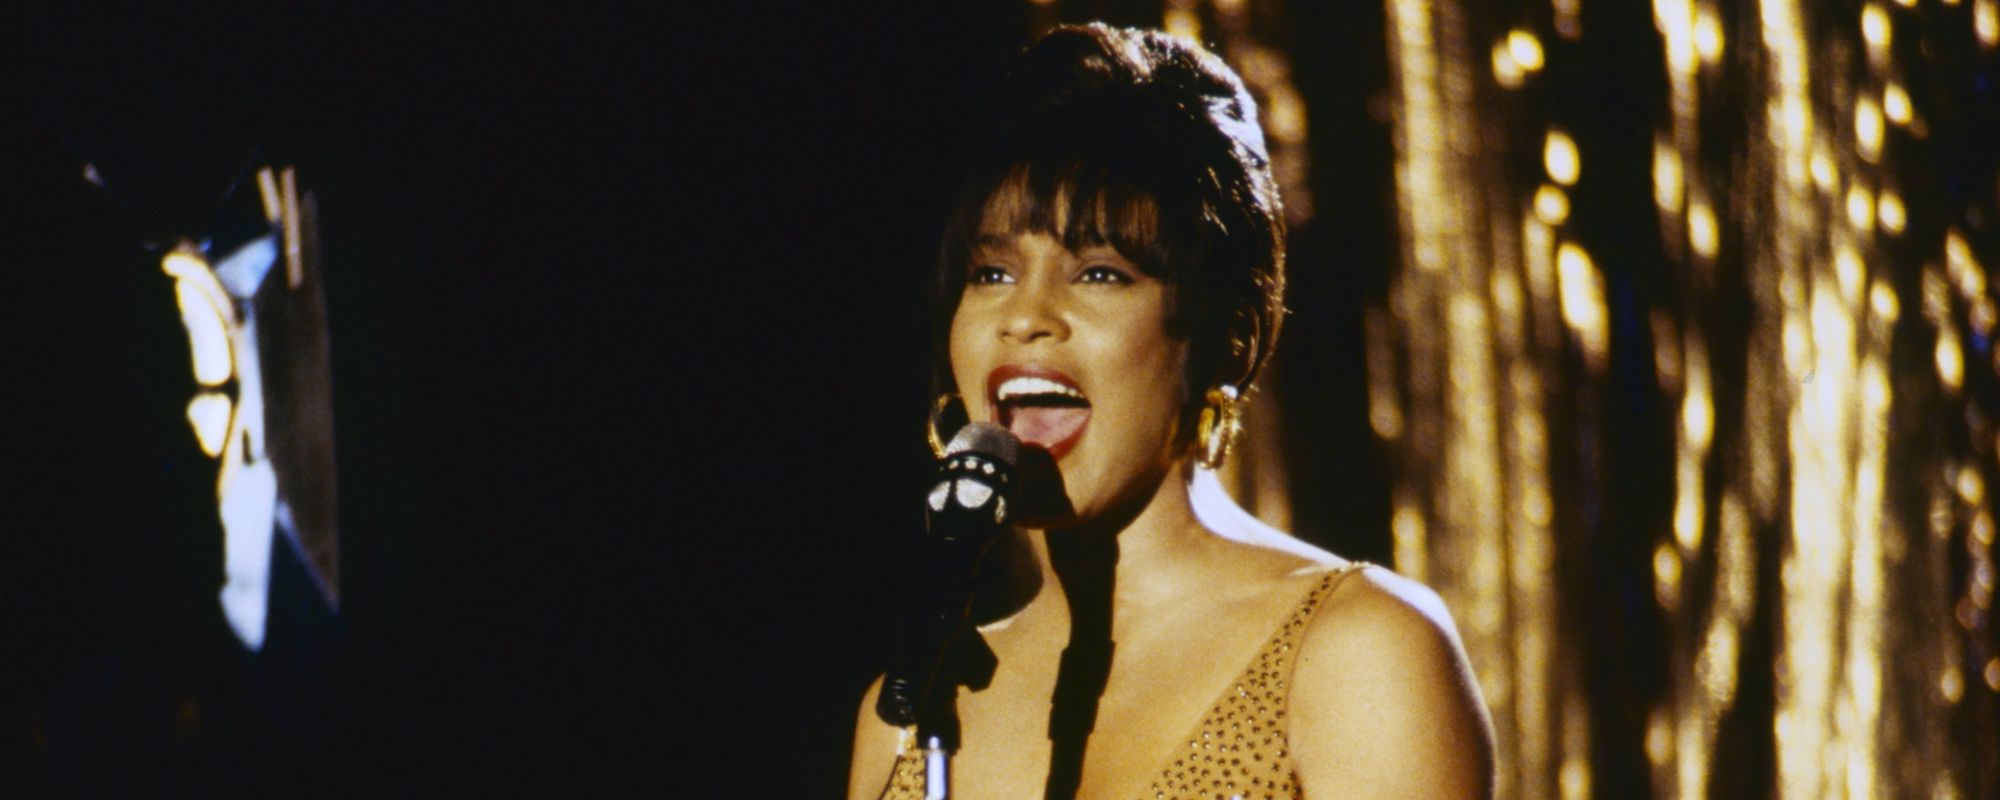 A Remake of ‘The Bodyguard’ is in the Works